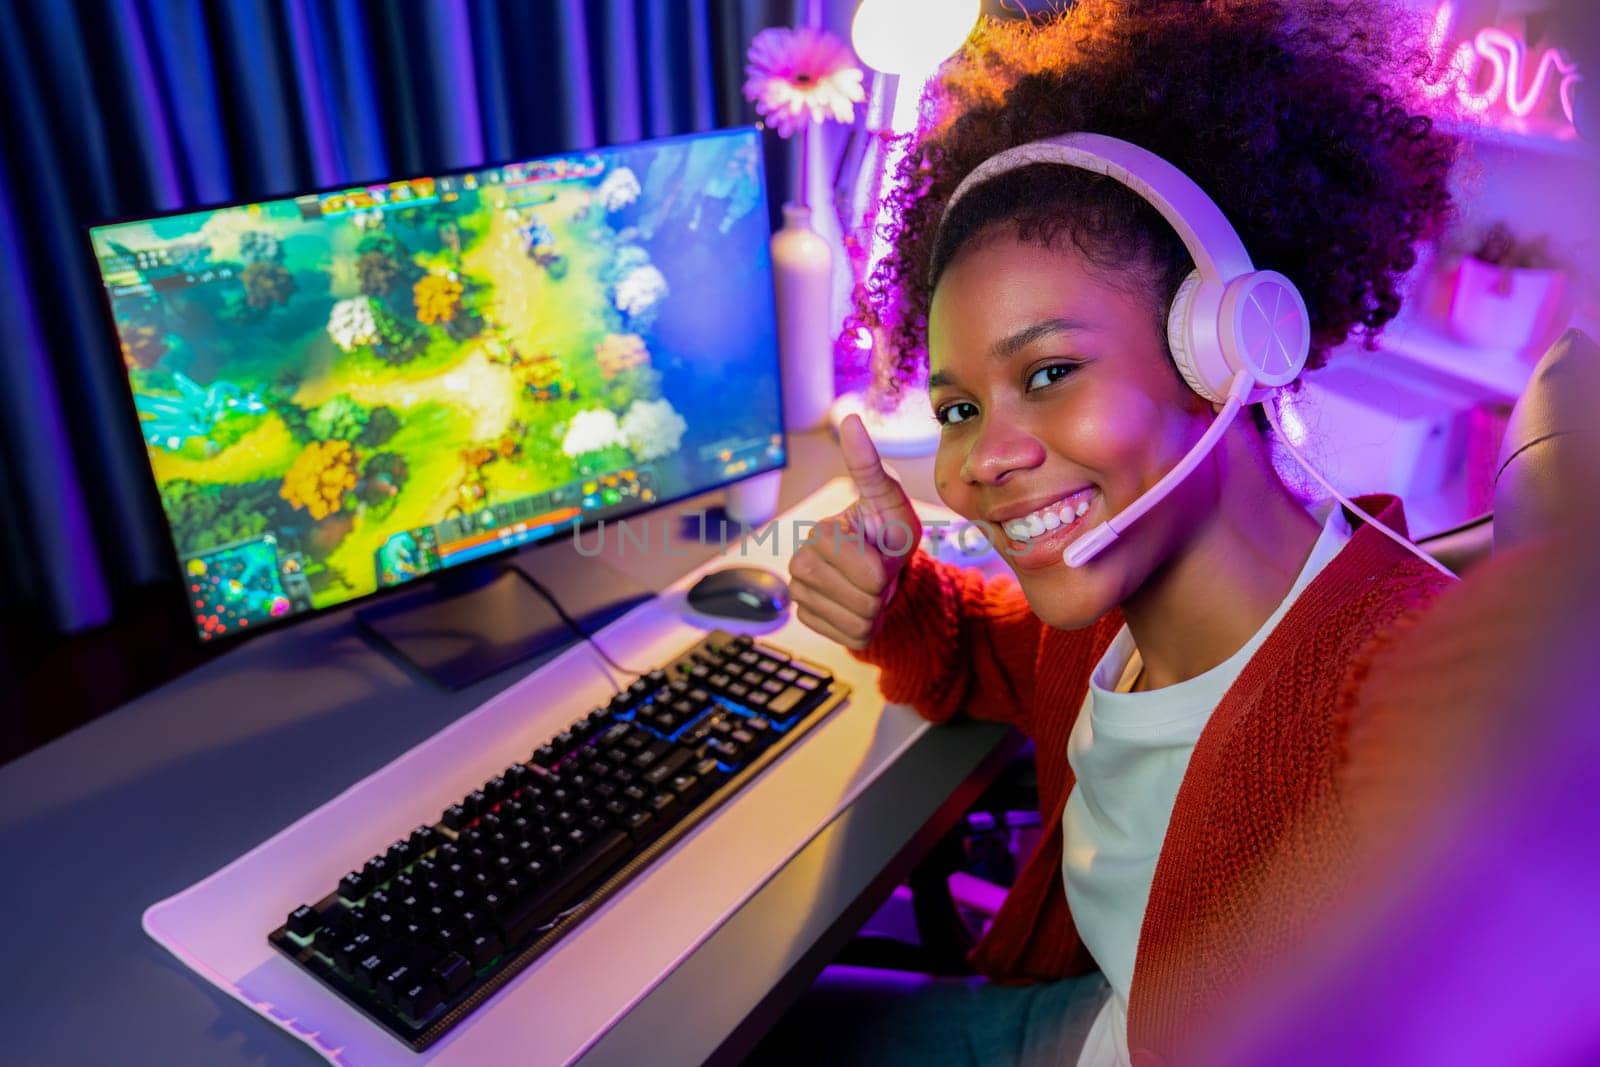 Host channel of gaming streamer, African girl playing fighting Moba game with joystick, wearing pastel headsets with mic, looking at the camera against background in neon color room. Tastemaker.